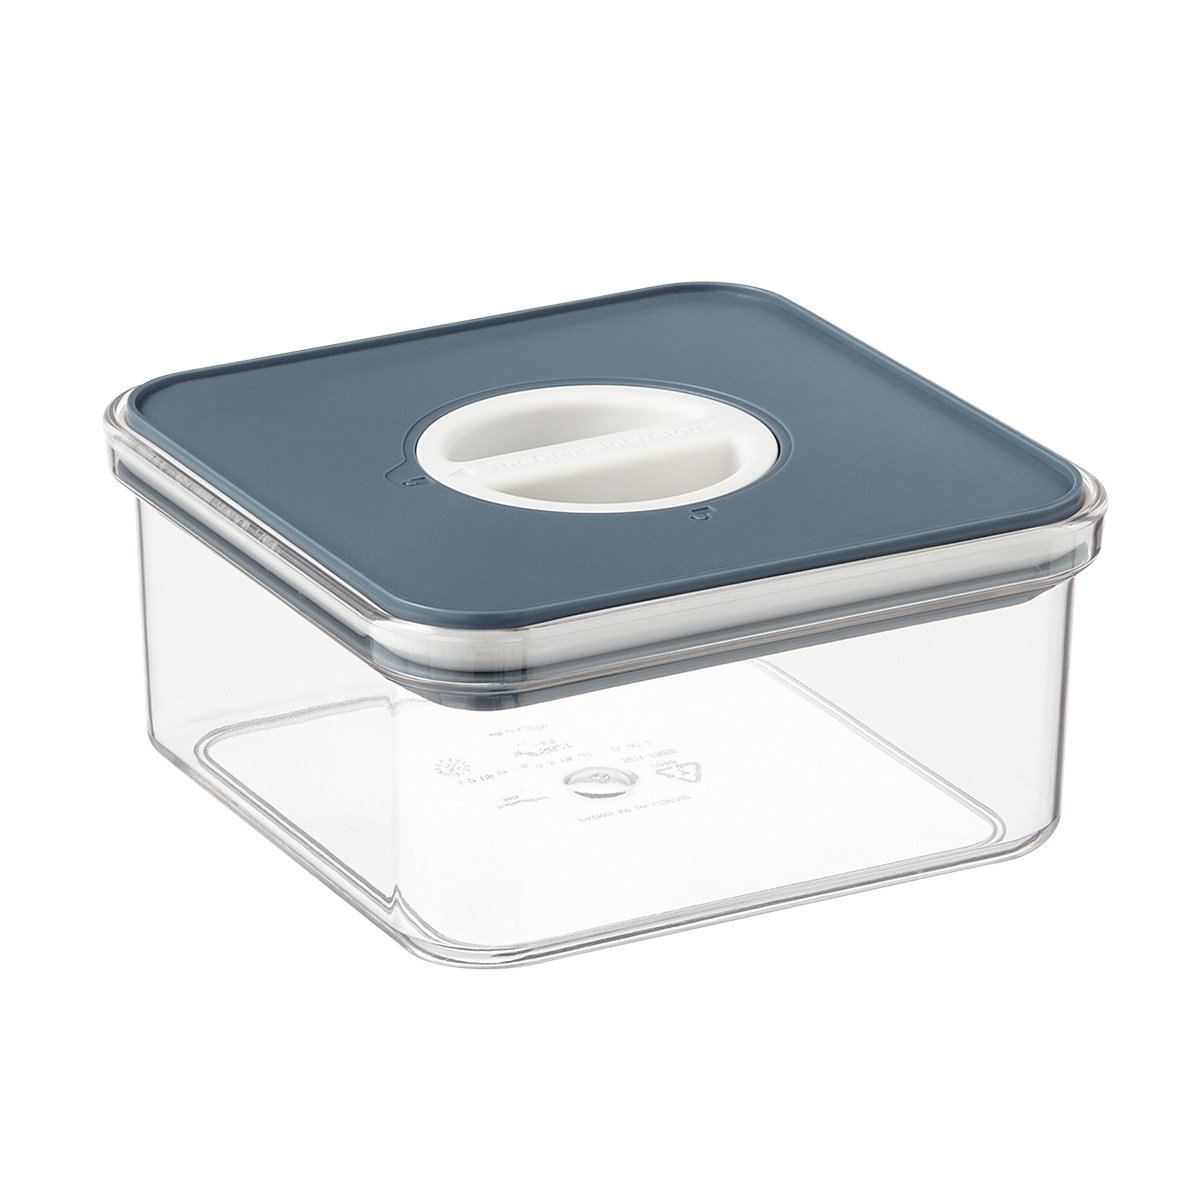 https://www.containerstore.com/catalogimages/426033/10084050_30_Ounce_Turn_And_Seal_Food.jpg